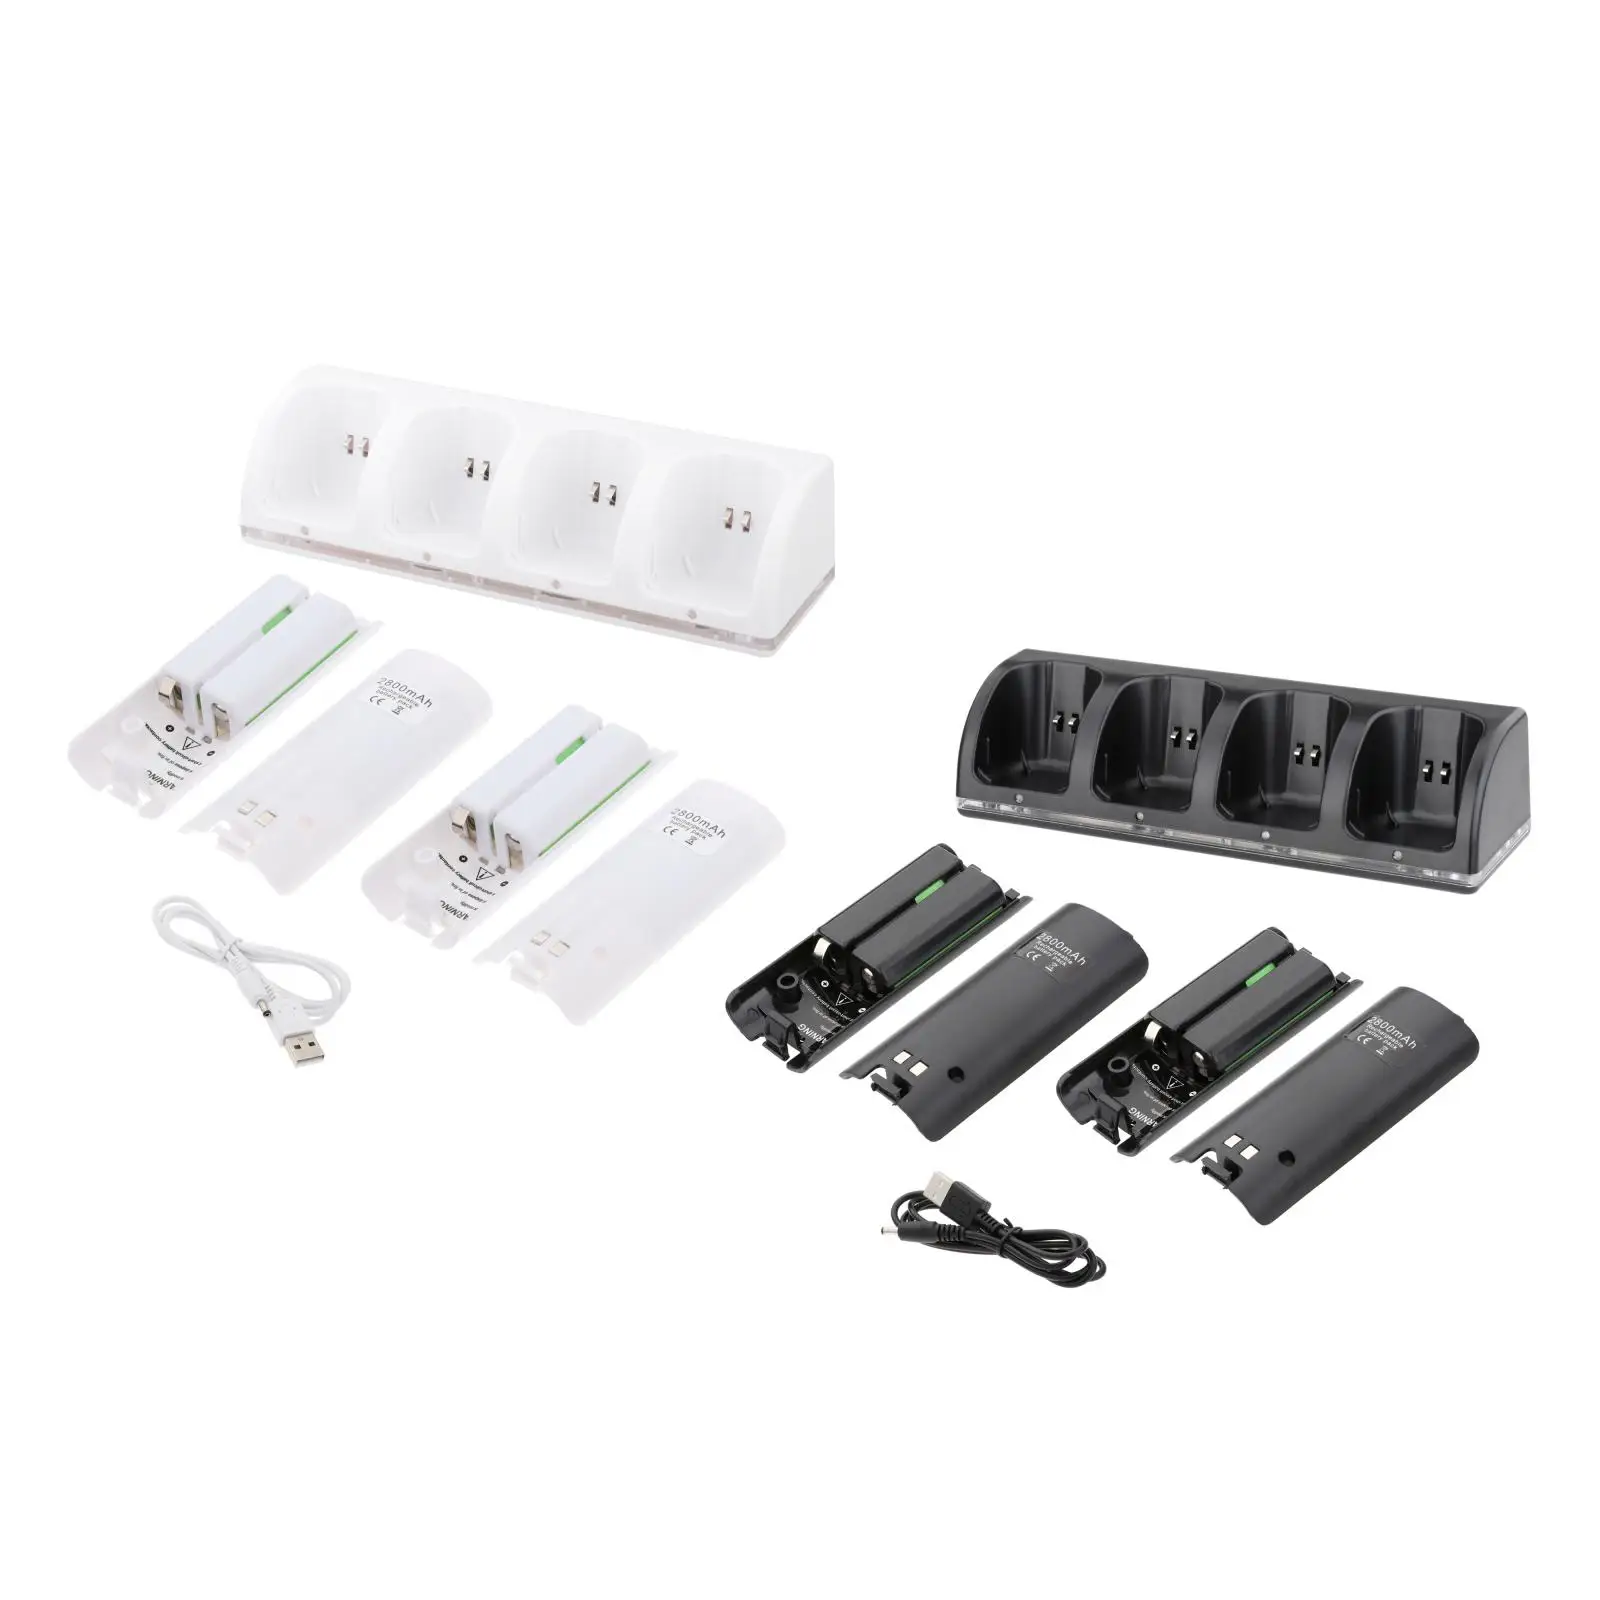 4-in-1 Battery Charger Charging Dock Station with USB Cable for Wii Game Console Remote Control Gamepad Game Accessories